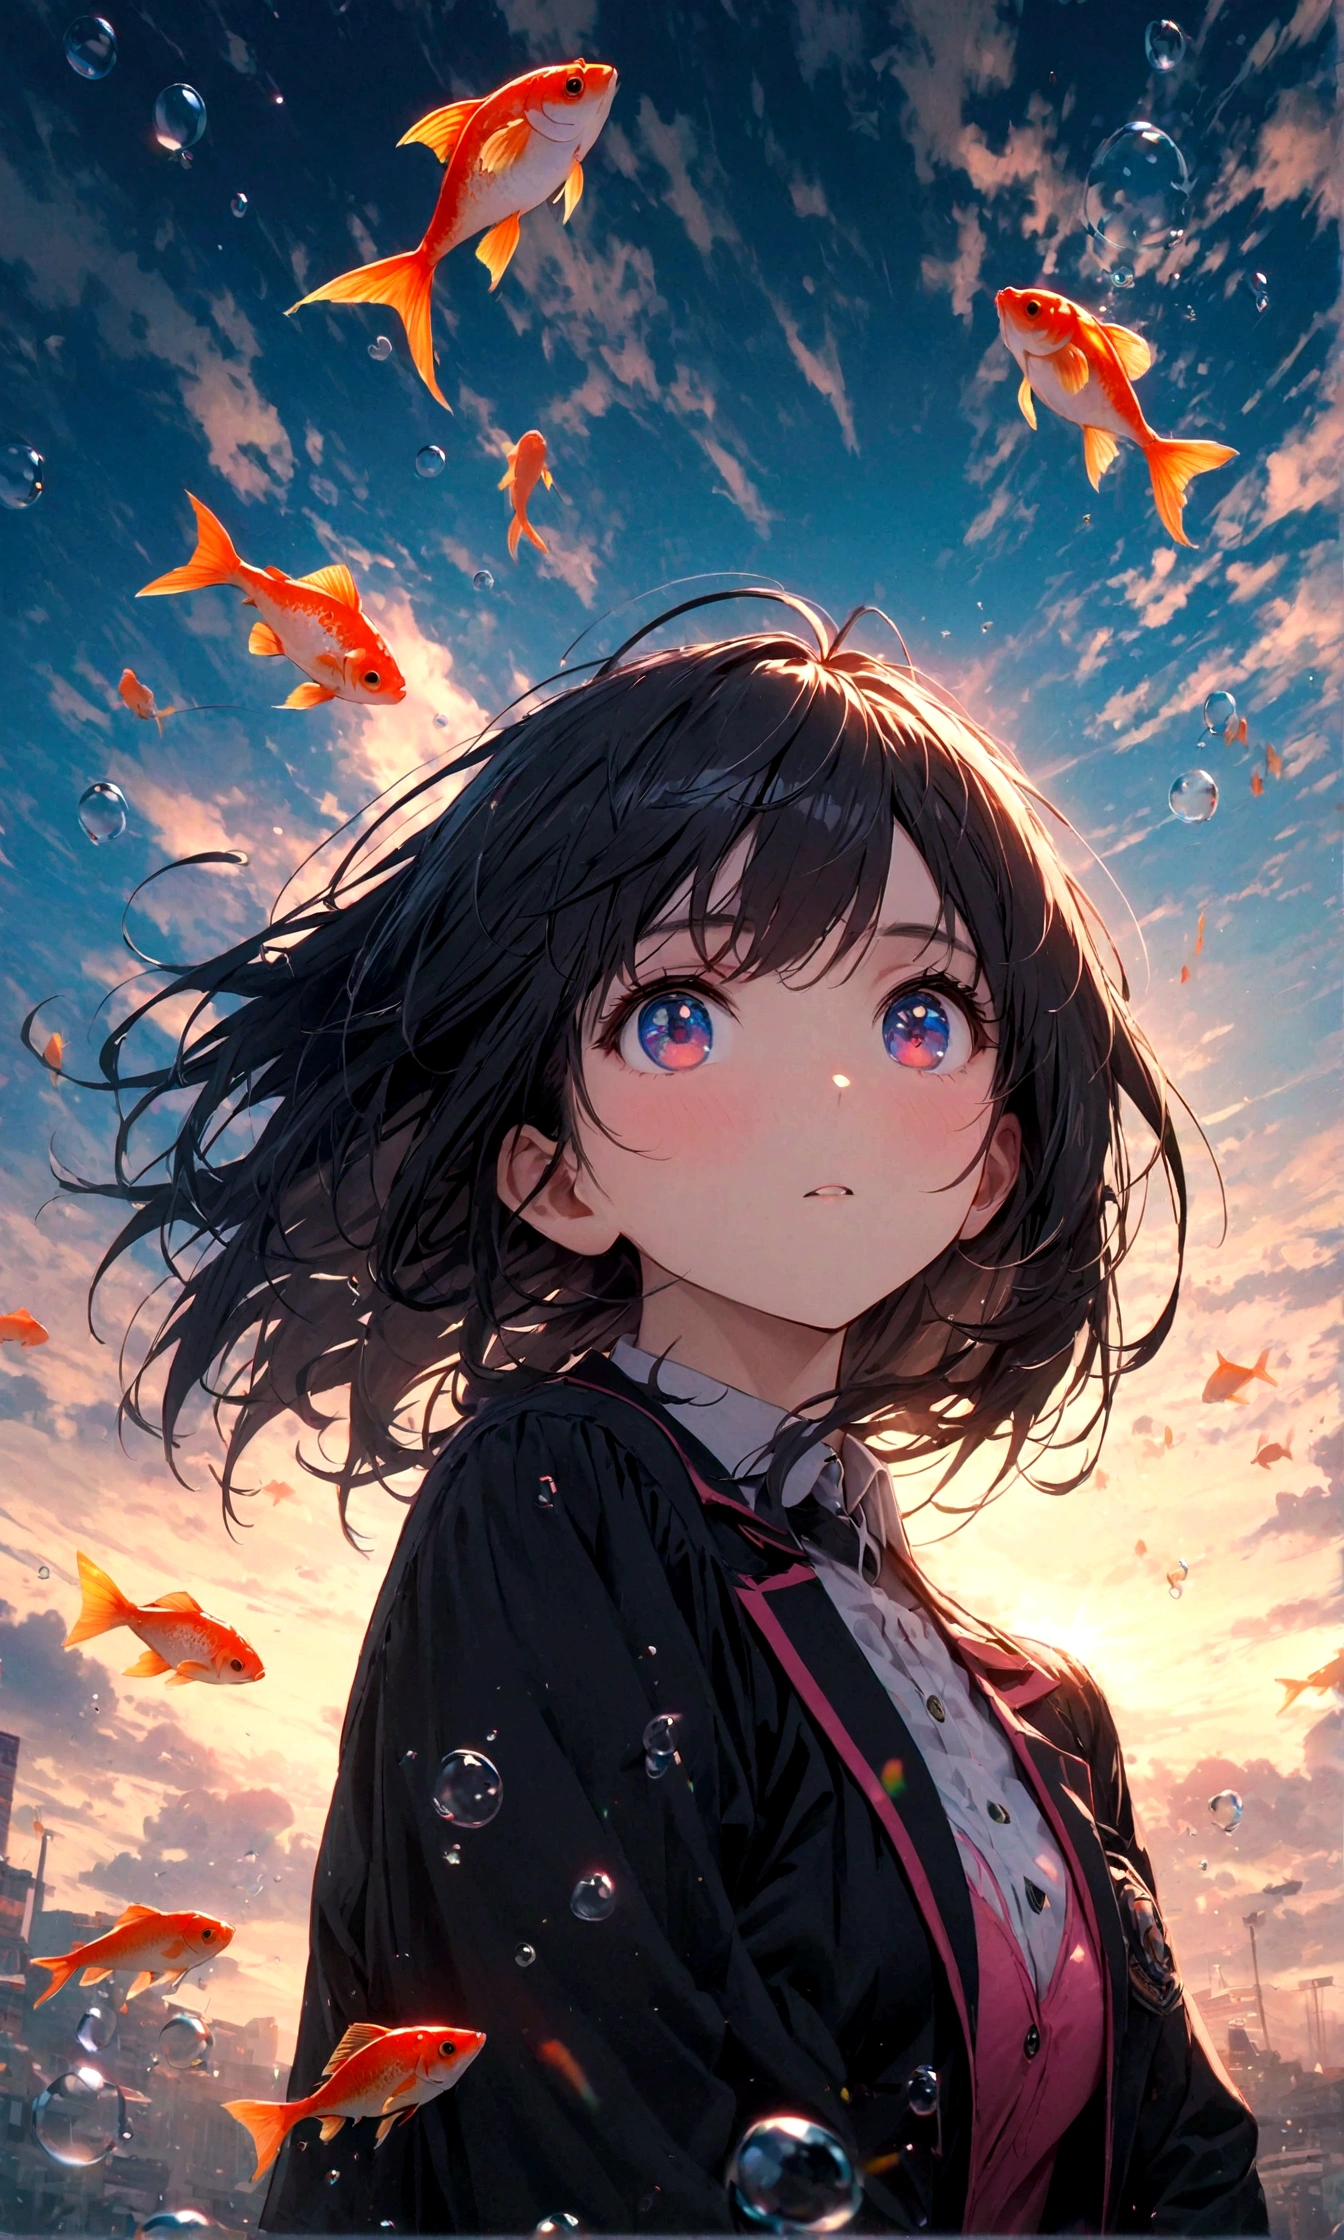 (female\(student, age of 15, JK, short silver floating hair, cosmic colored eyes, black color uniform of school, pale skin, tired face with no shine in the eyes\) is looking up at the sky), (so many goldfish are swimming in the air), beautiful sky, beautiful clouds, summery colorful flowers are blooming here and there, (crystal clear bubbles are shining prism here and there in the sky), there is the noonday moon and noonday stars in the sky, female is at messy downtown, BREAK ,quality\(8k,wallpaper of extremely detailed CG unit, ​masterpiece,hight resolution,top-quality,top-quality real texture skin,hyper realisitic,increase the resolution,RAW photos,best qualtiy,highly detailed,the wallpaper,cinematic lighting,ray trace,golden ratio\),(long shot),wide shot,